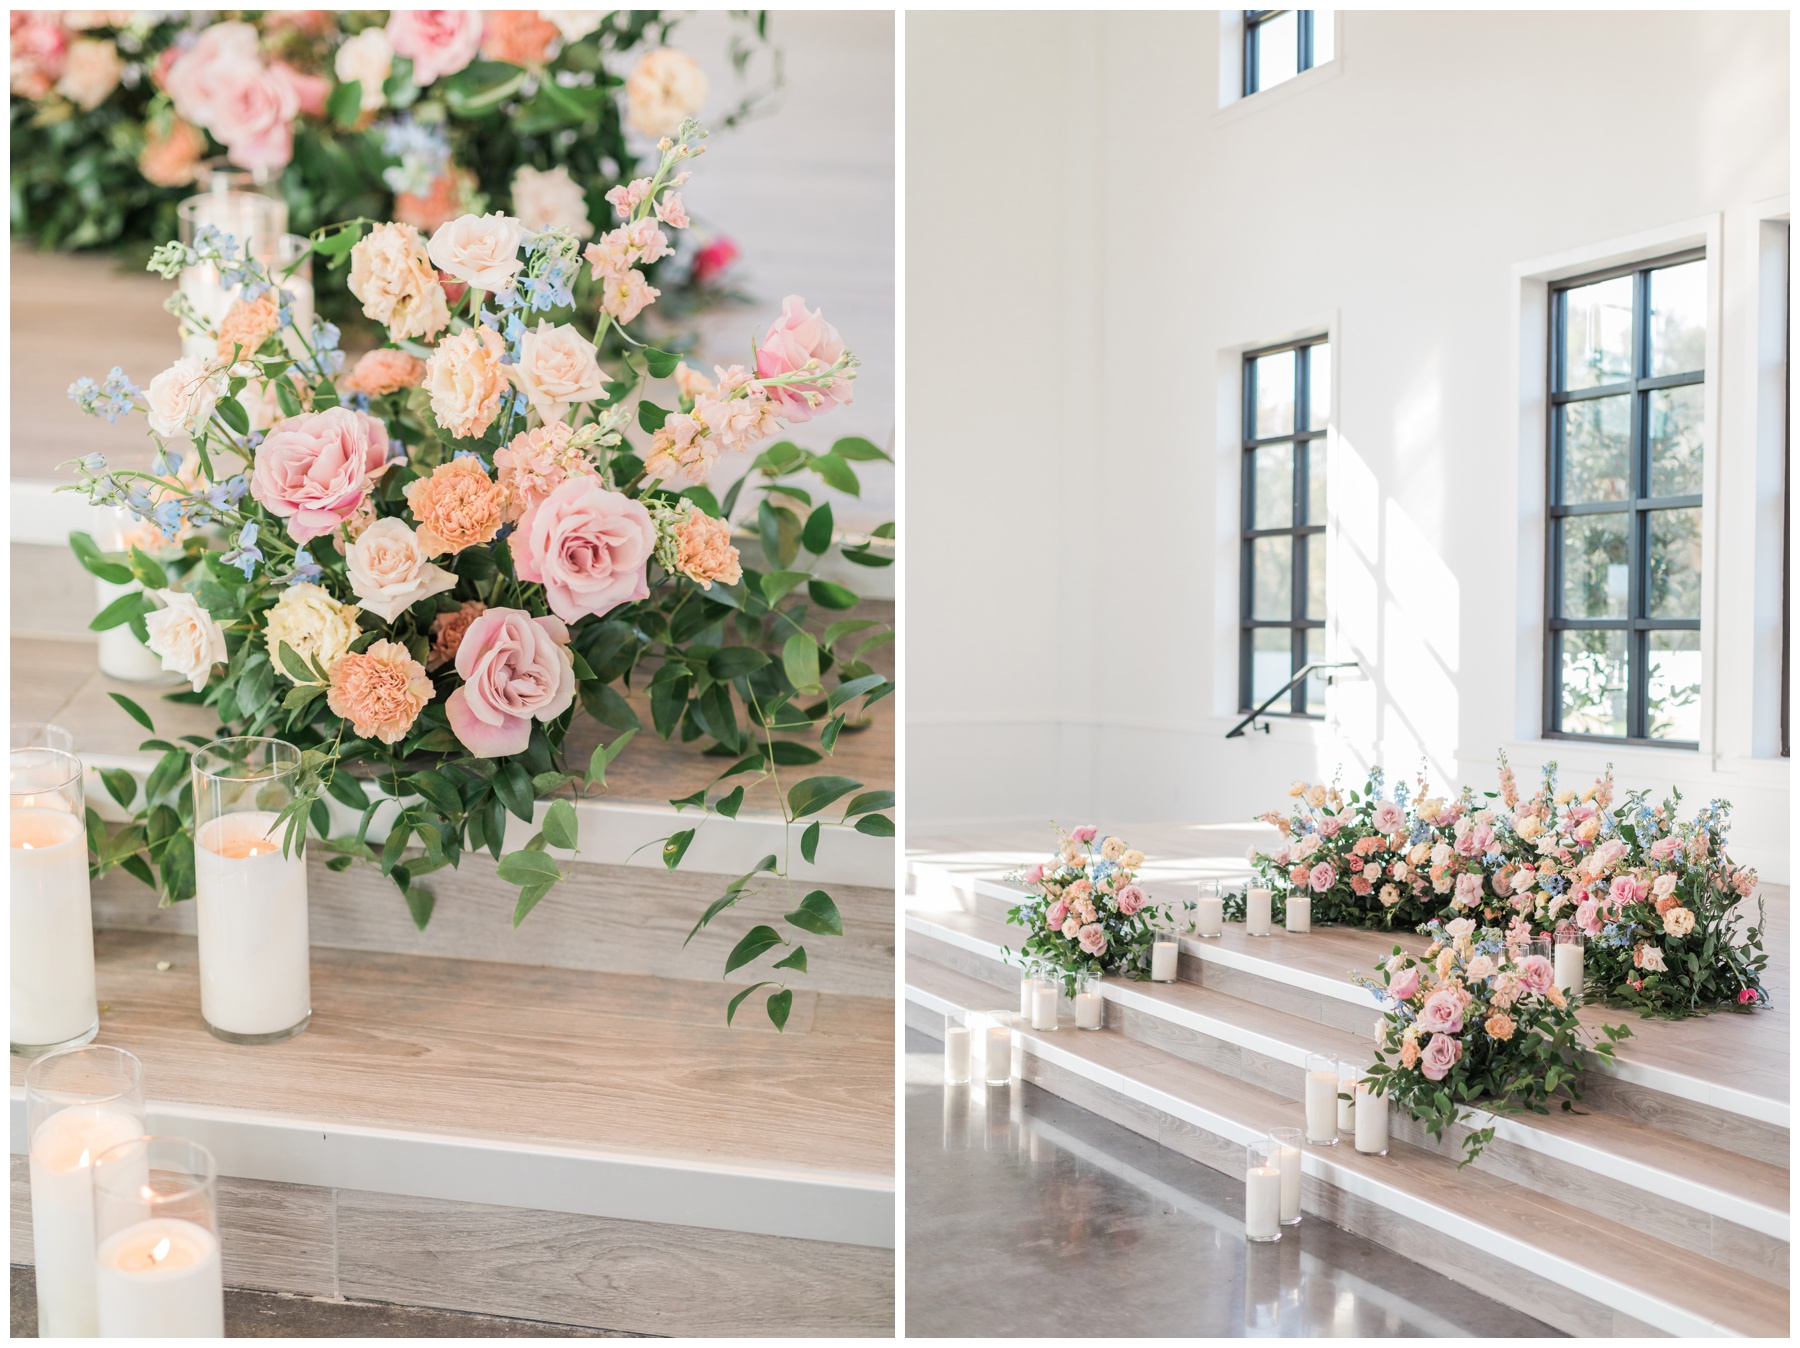 Ivory pillar candles and blush and peach roses for an indoor wedding ceremony